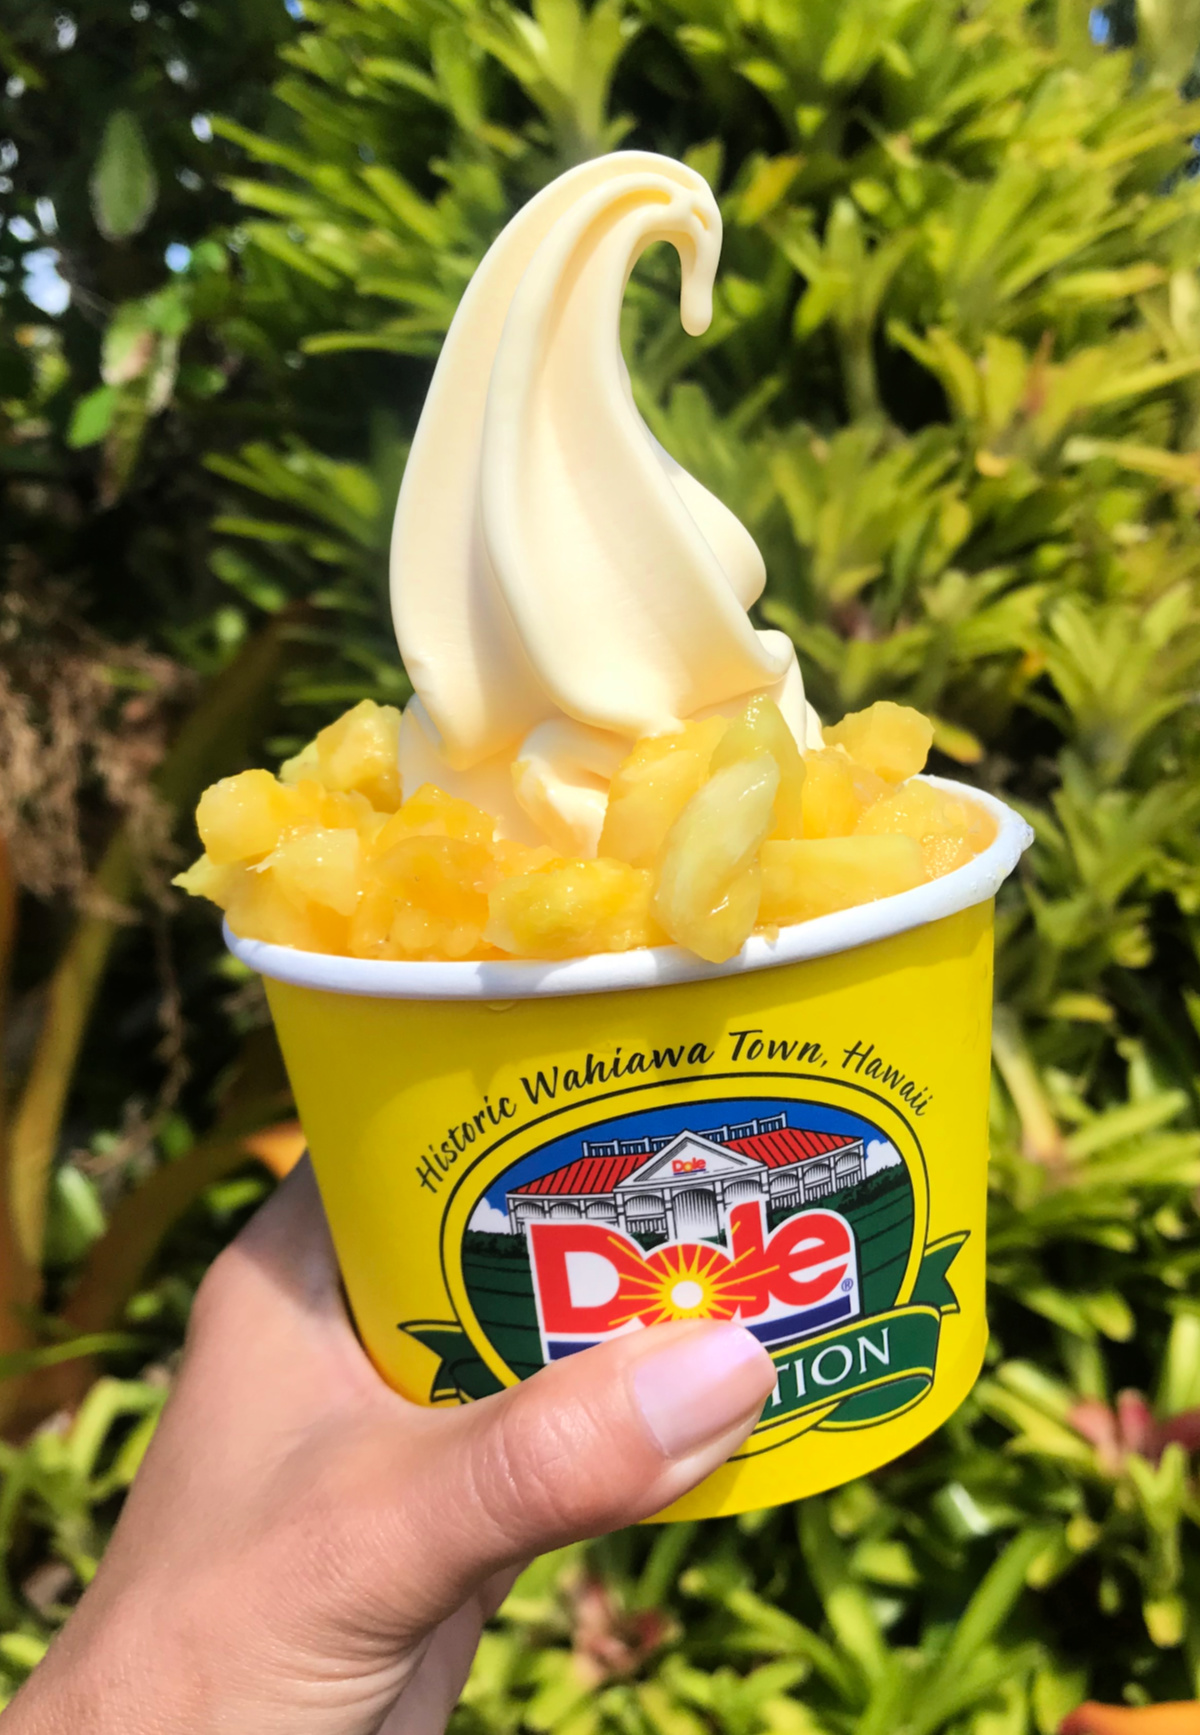  Whip at the Dole Plantation